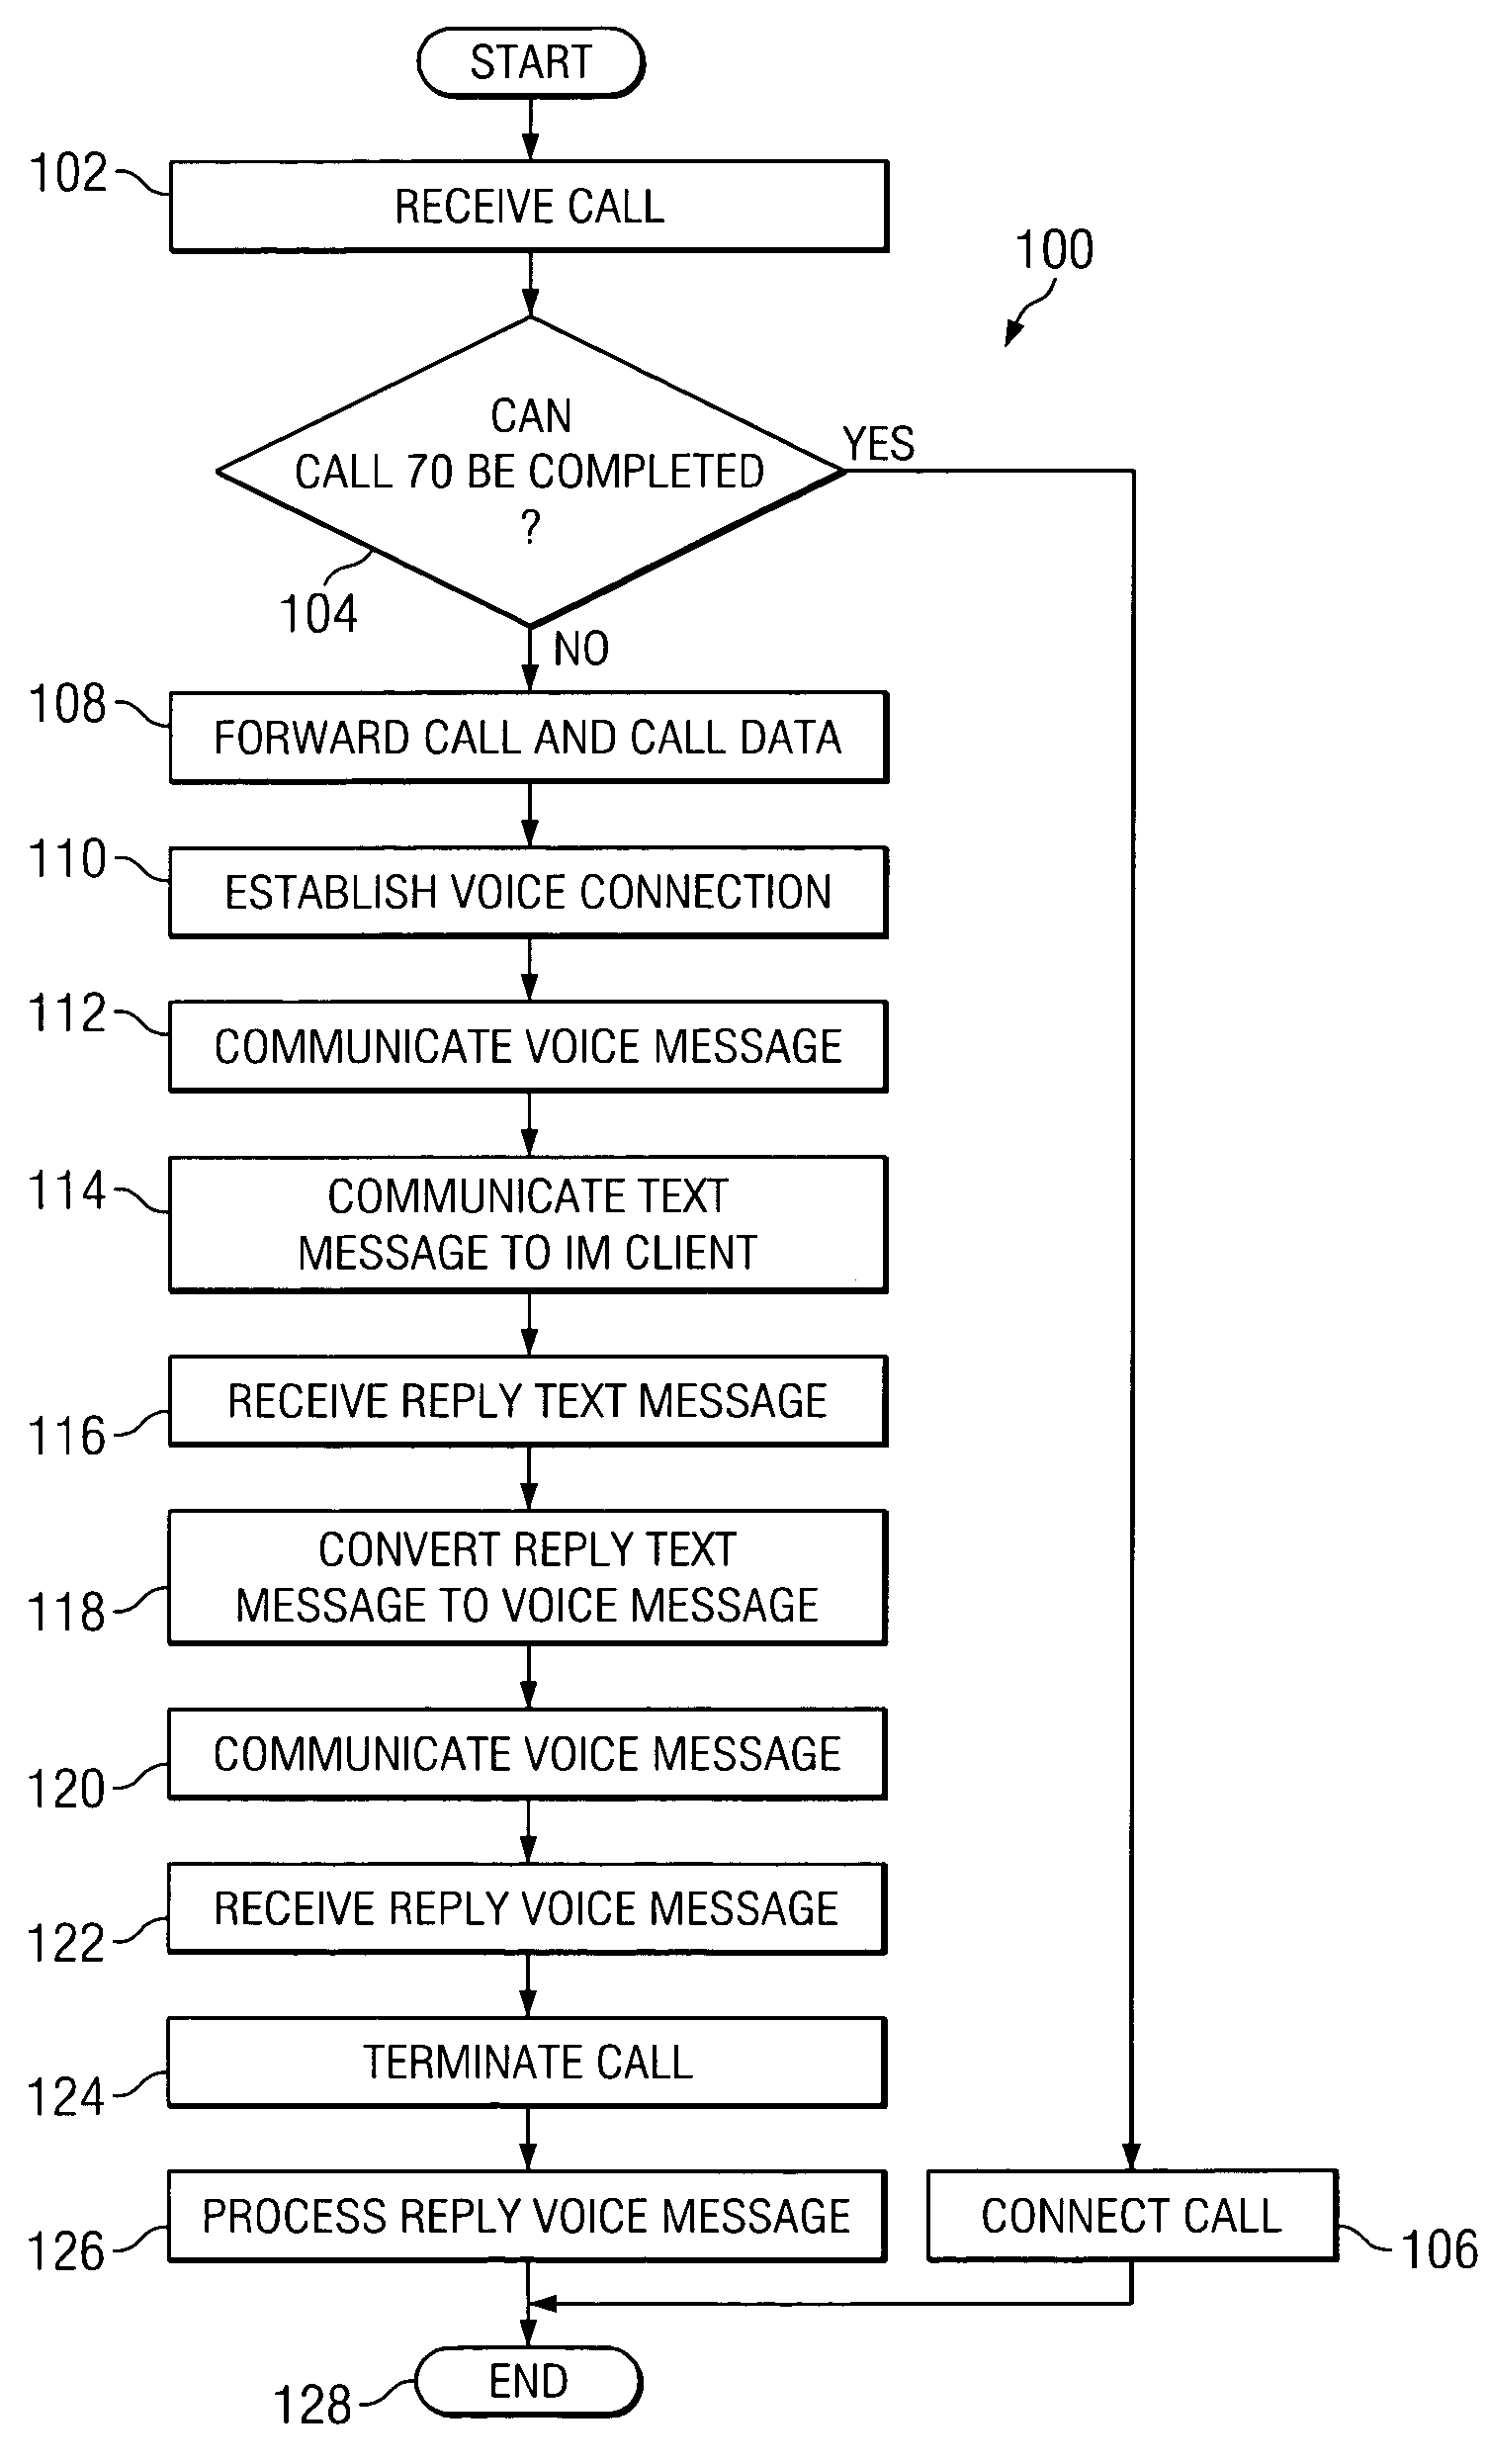 System and method for communicating messages between a text-based client and a voice-based client